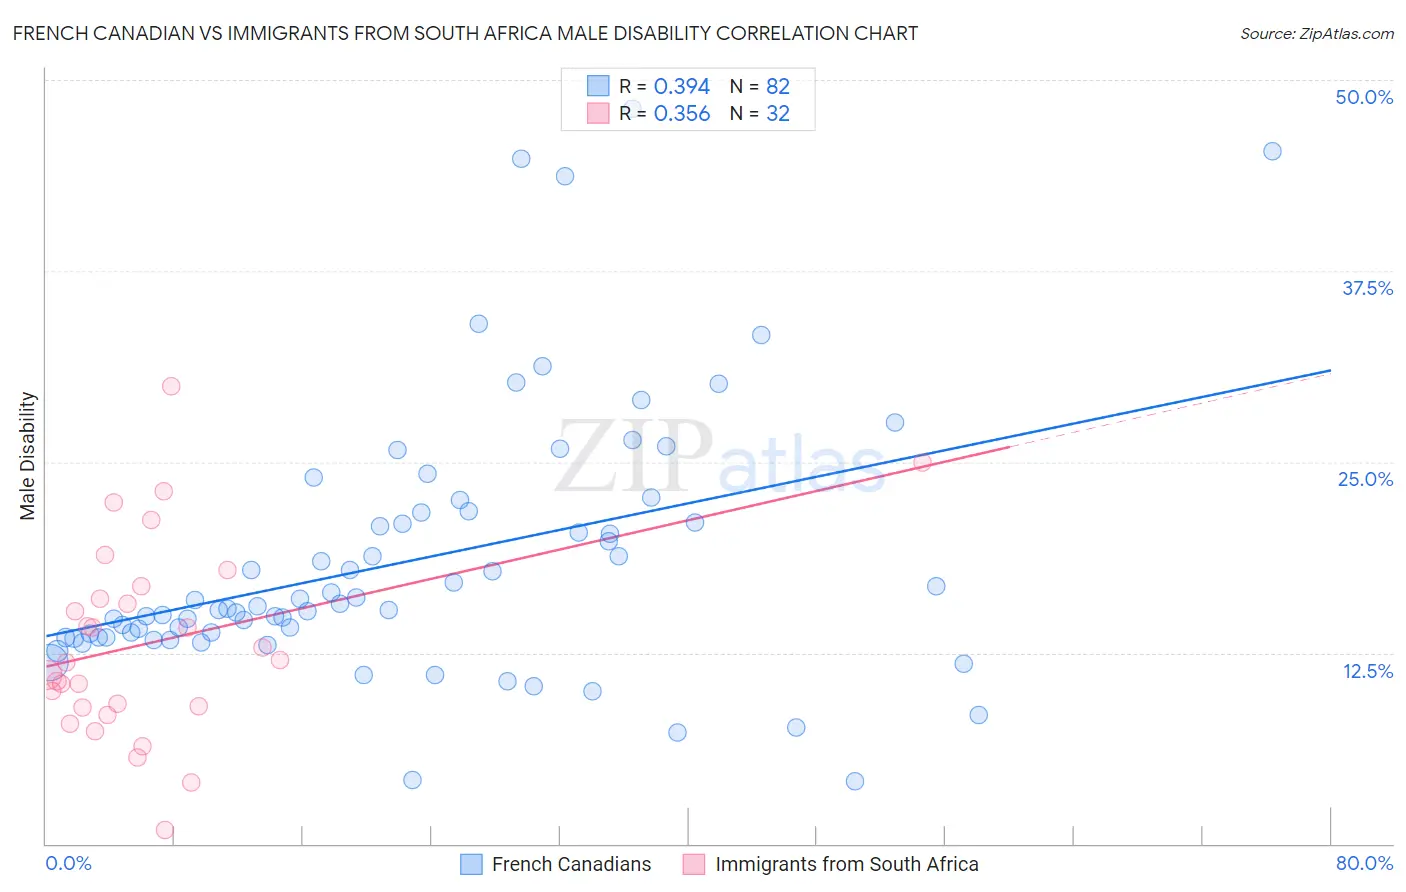 French Canadian vs Immigrants from South Africa Male Disability